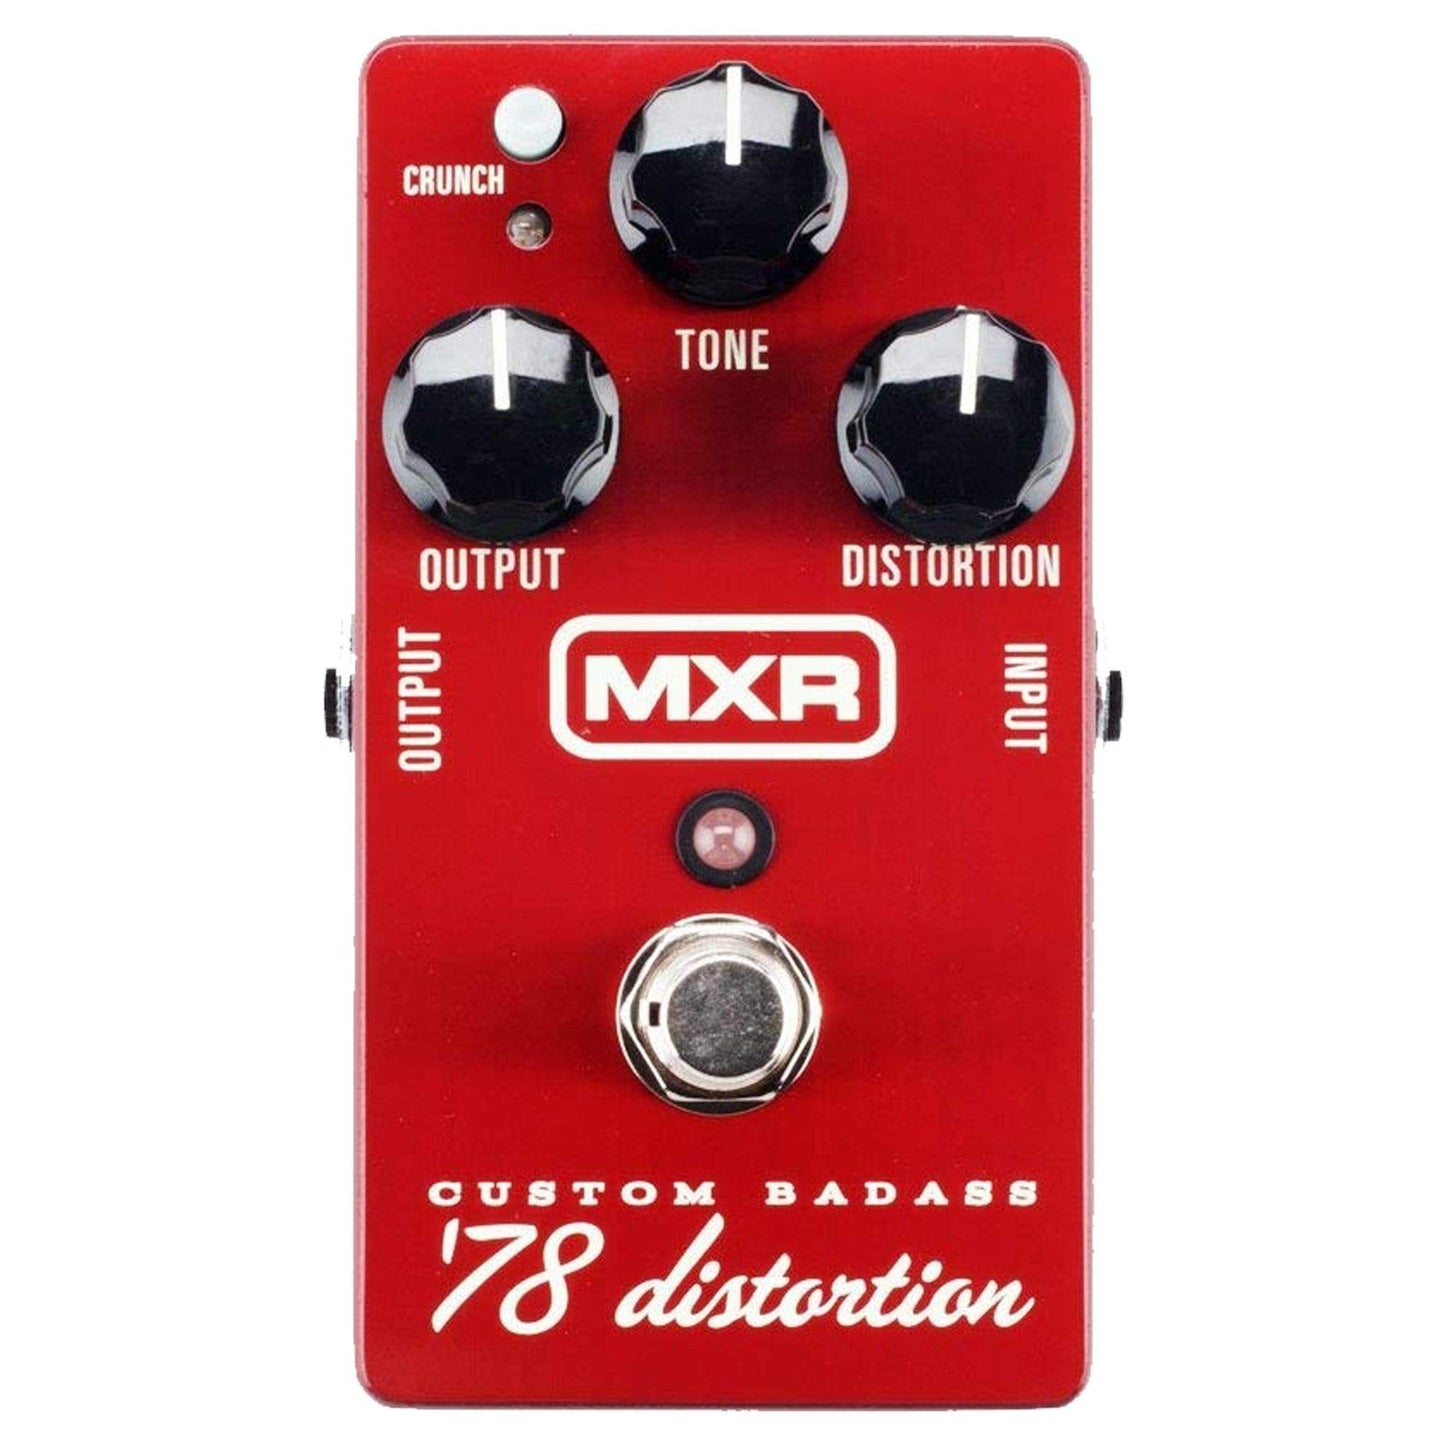 MXR M-78 Custom Badass '78 Distortion Bundle w/ Truetone 1 Spot Space Saving 9v Adapter Effects and Pedals / Overdrive and Boost